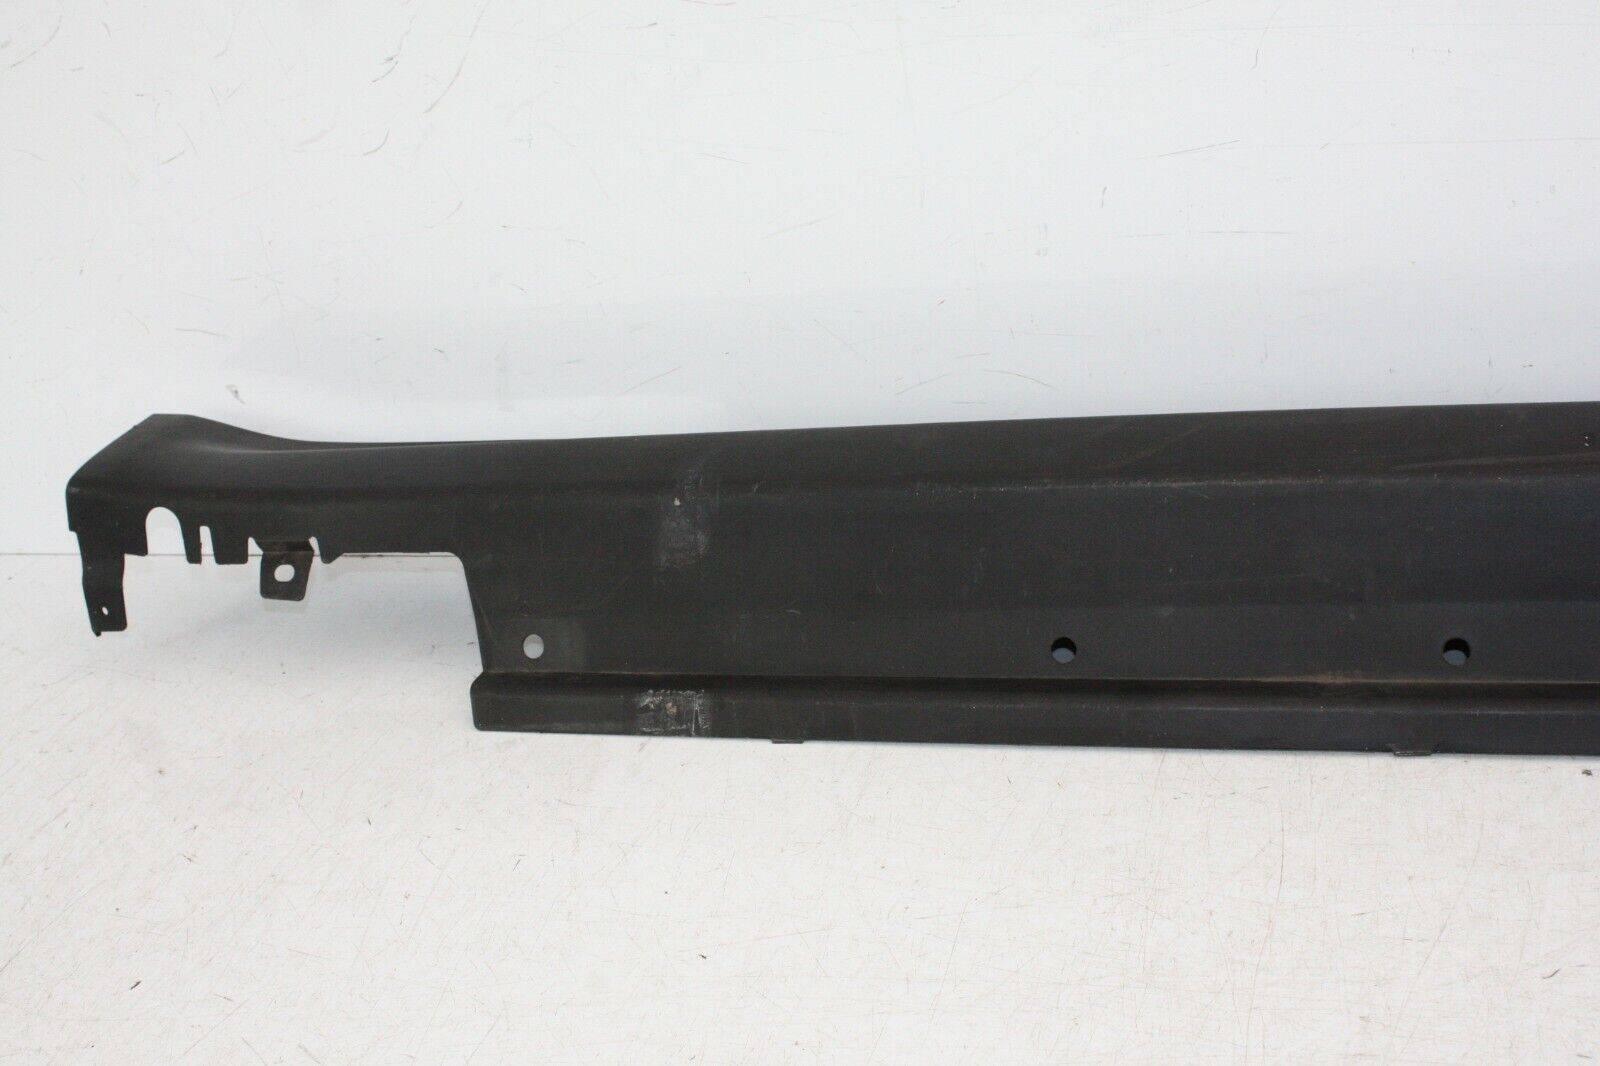 MINI-COOPER-R56-RIGHT-SIDE-SKIRT-2006-TO-2013-7147916-175367545027-9